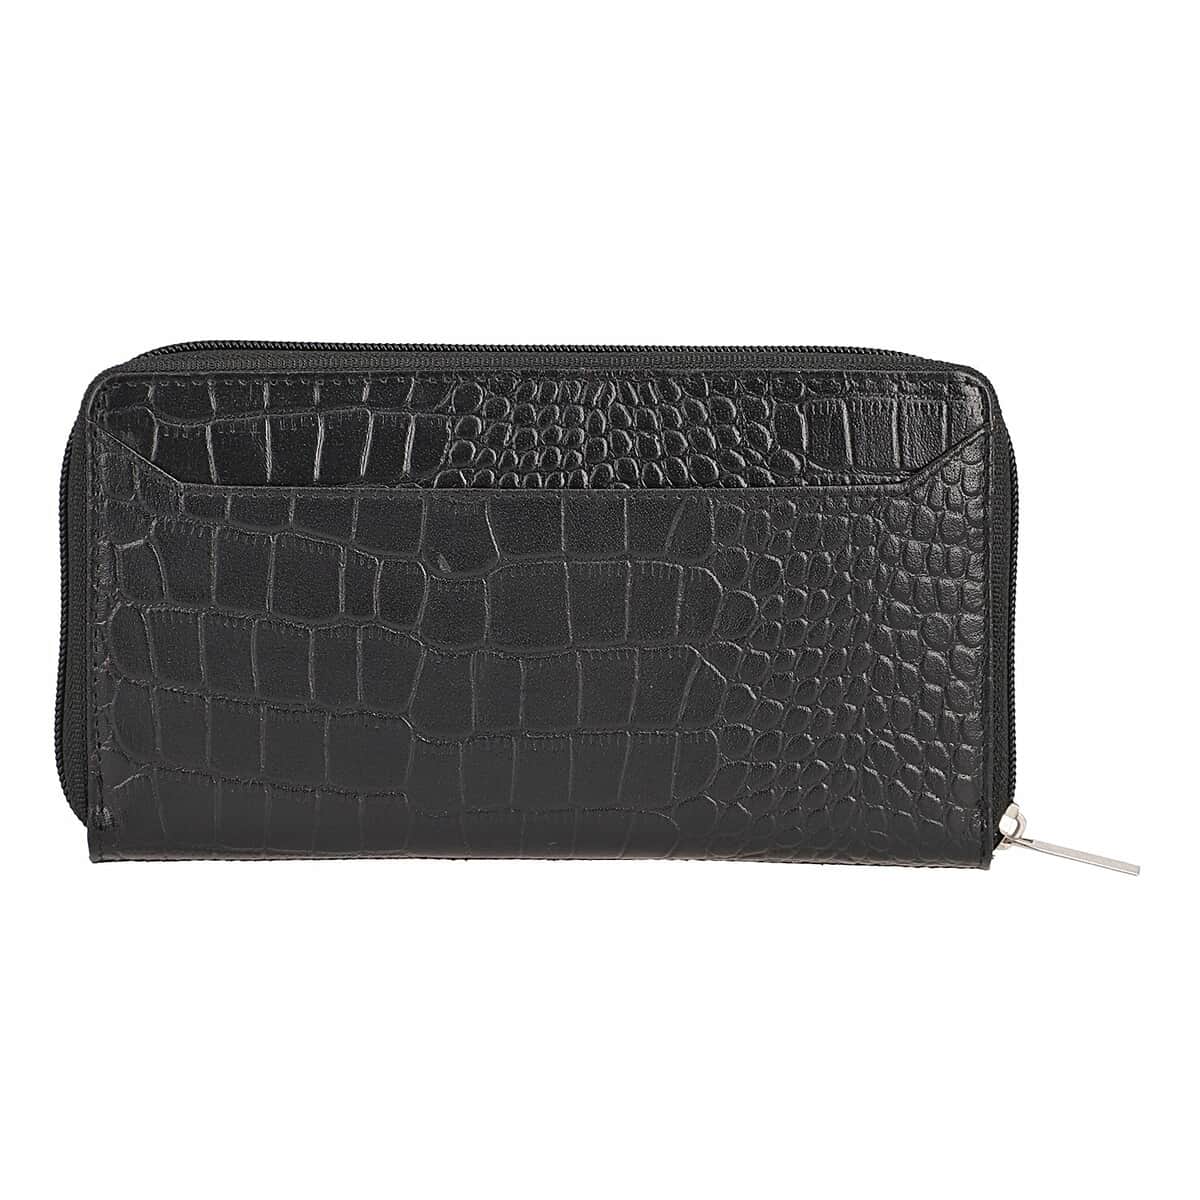 "100% Genuine Leather Wallet SIZE: 7.5(L)x4.5(W)x0.5(H) inches COLOR: Black" image number 3